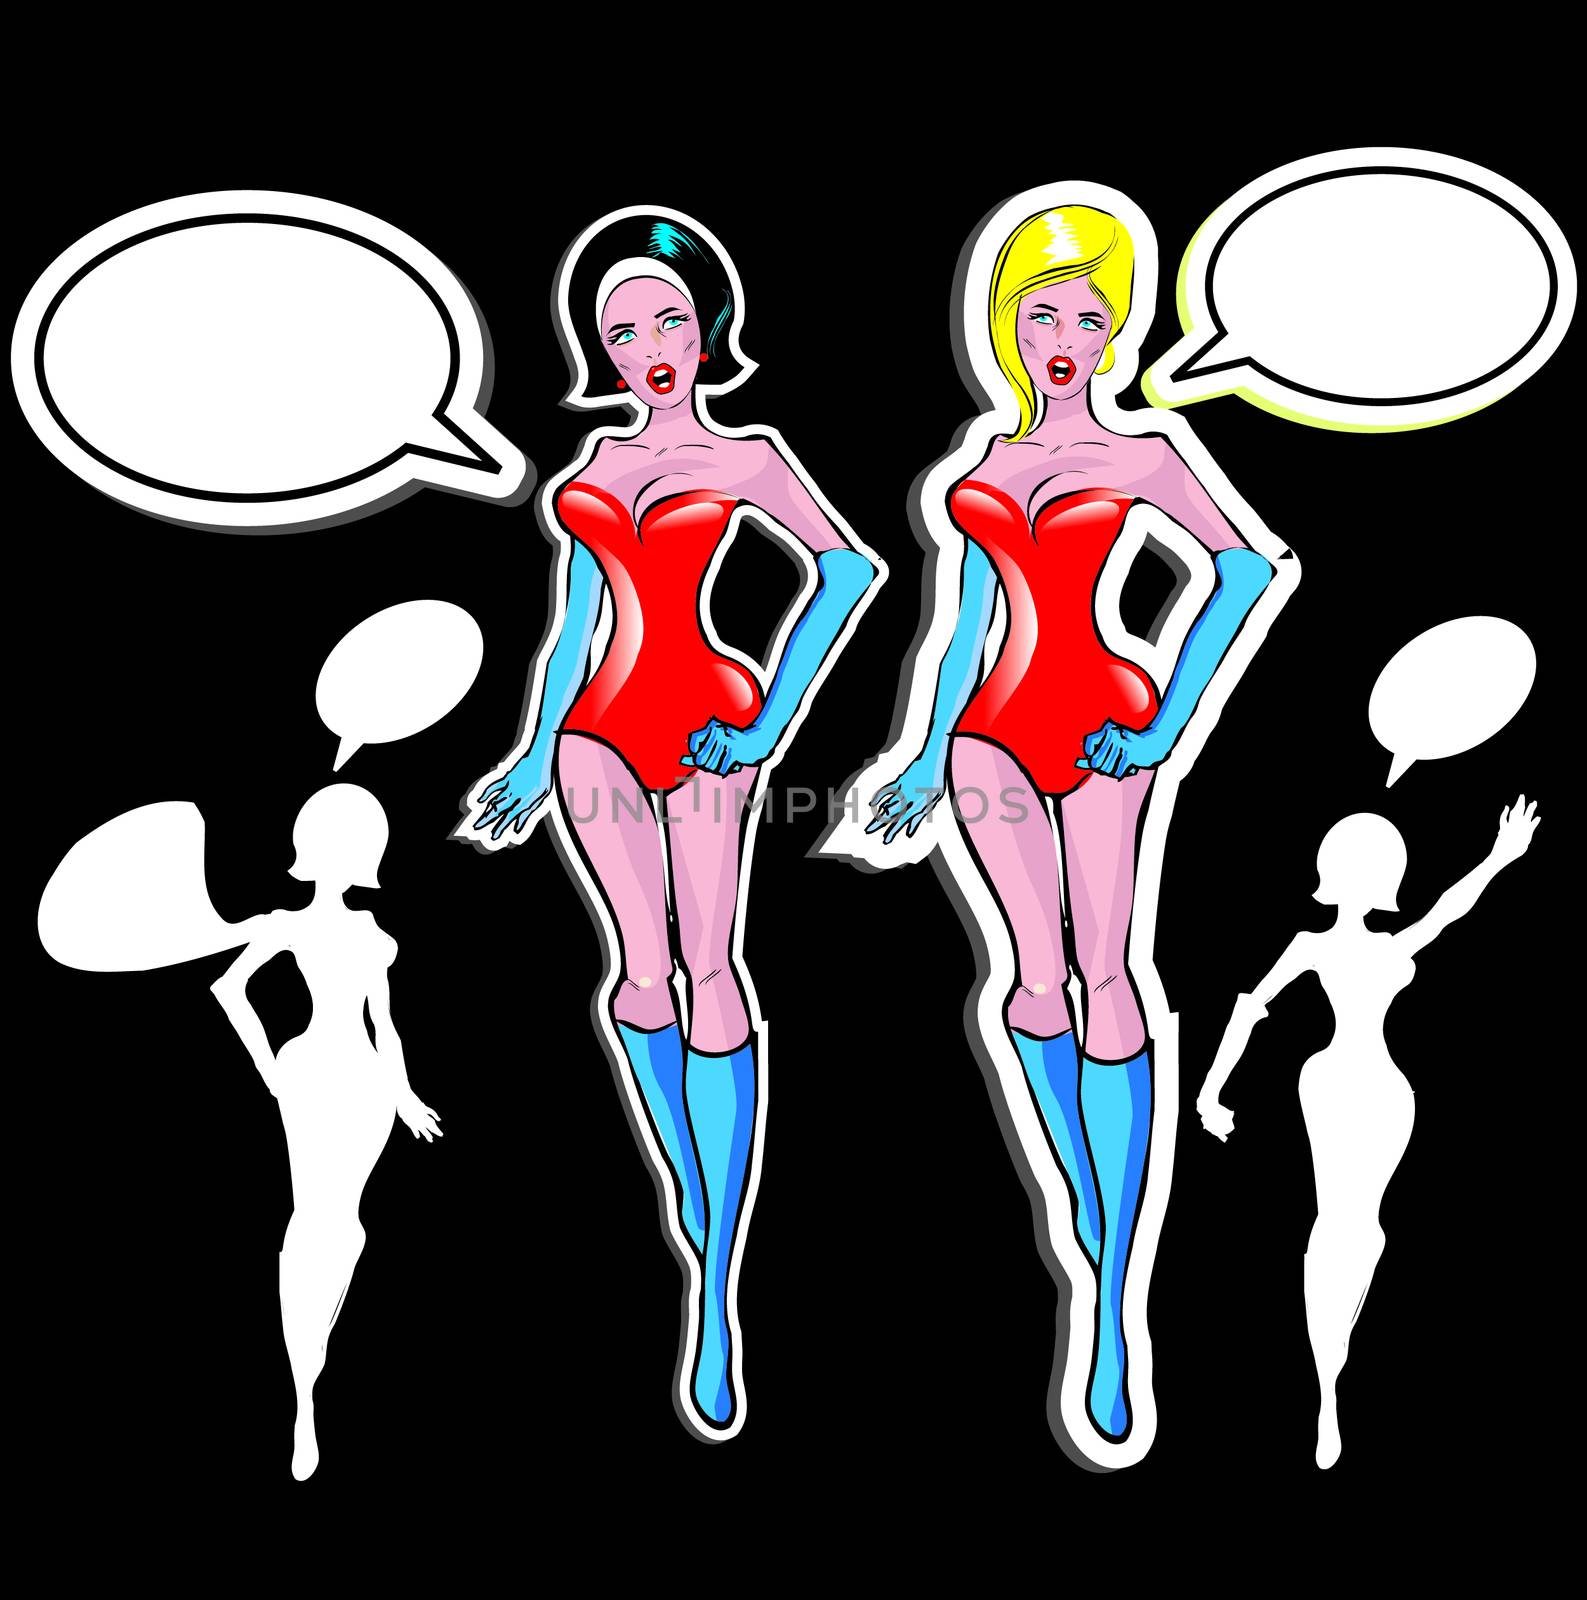 Super woman Lover vector poster with woman and talk bubble, silhouette. One of fashion pinup illustrations 